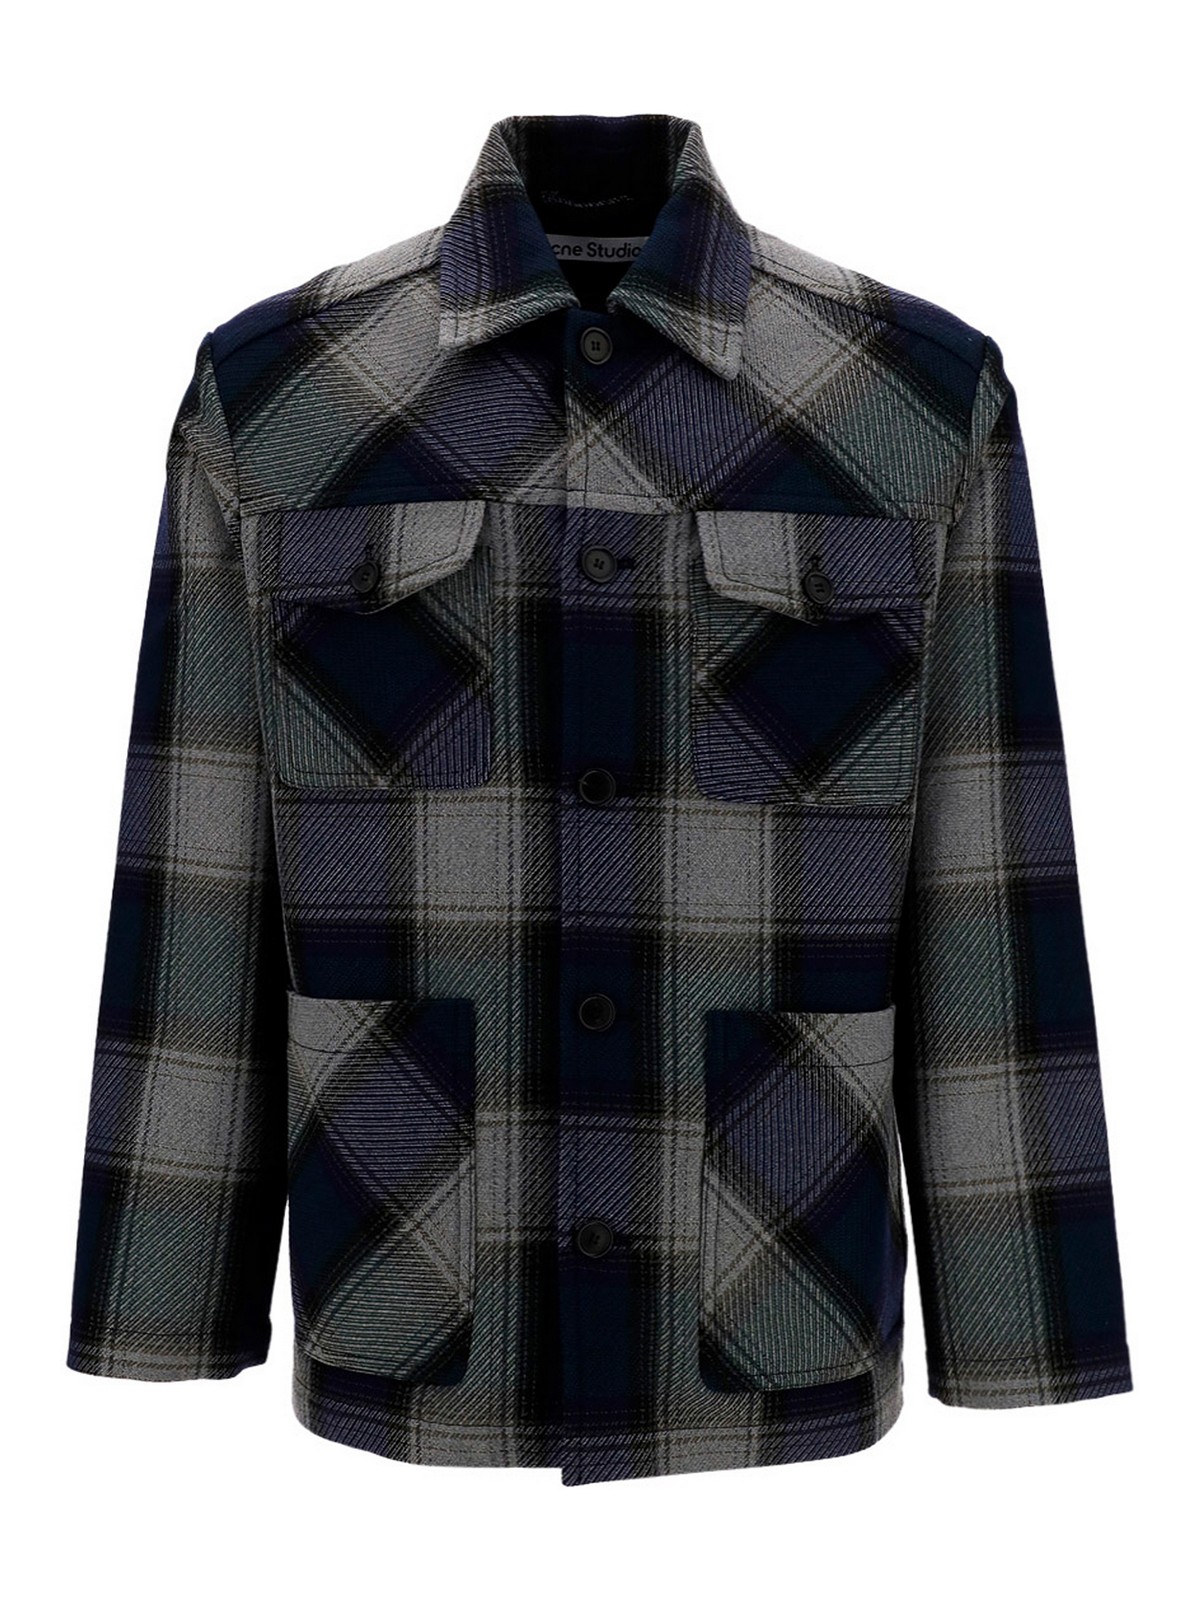 ACNE STUDIOS CHECKED WOOL BLEND JACKET